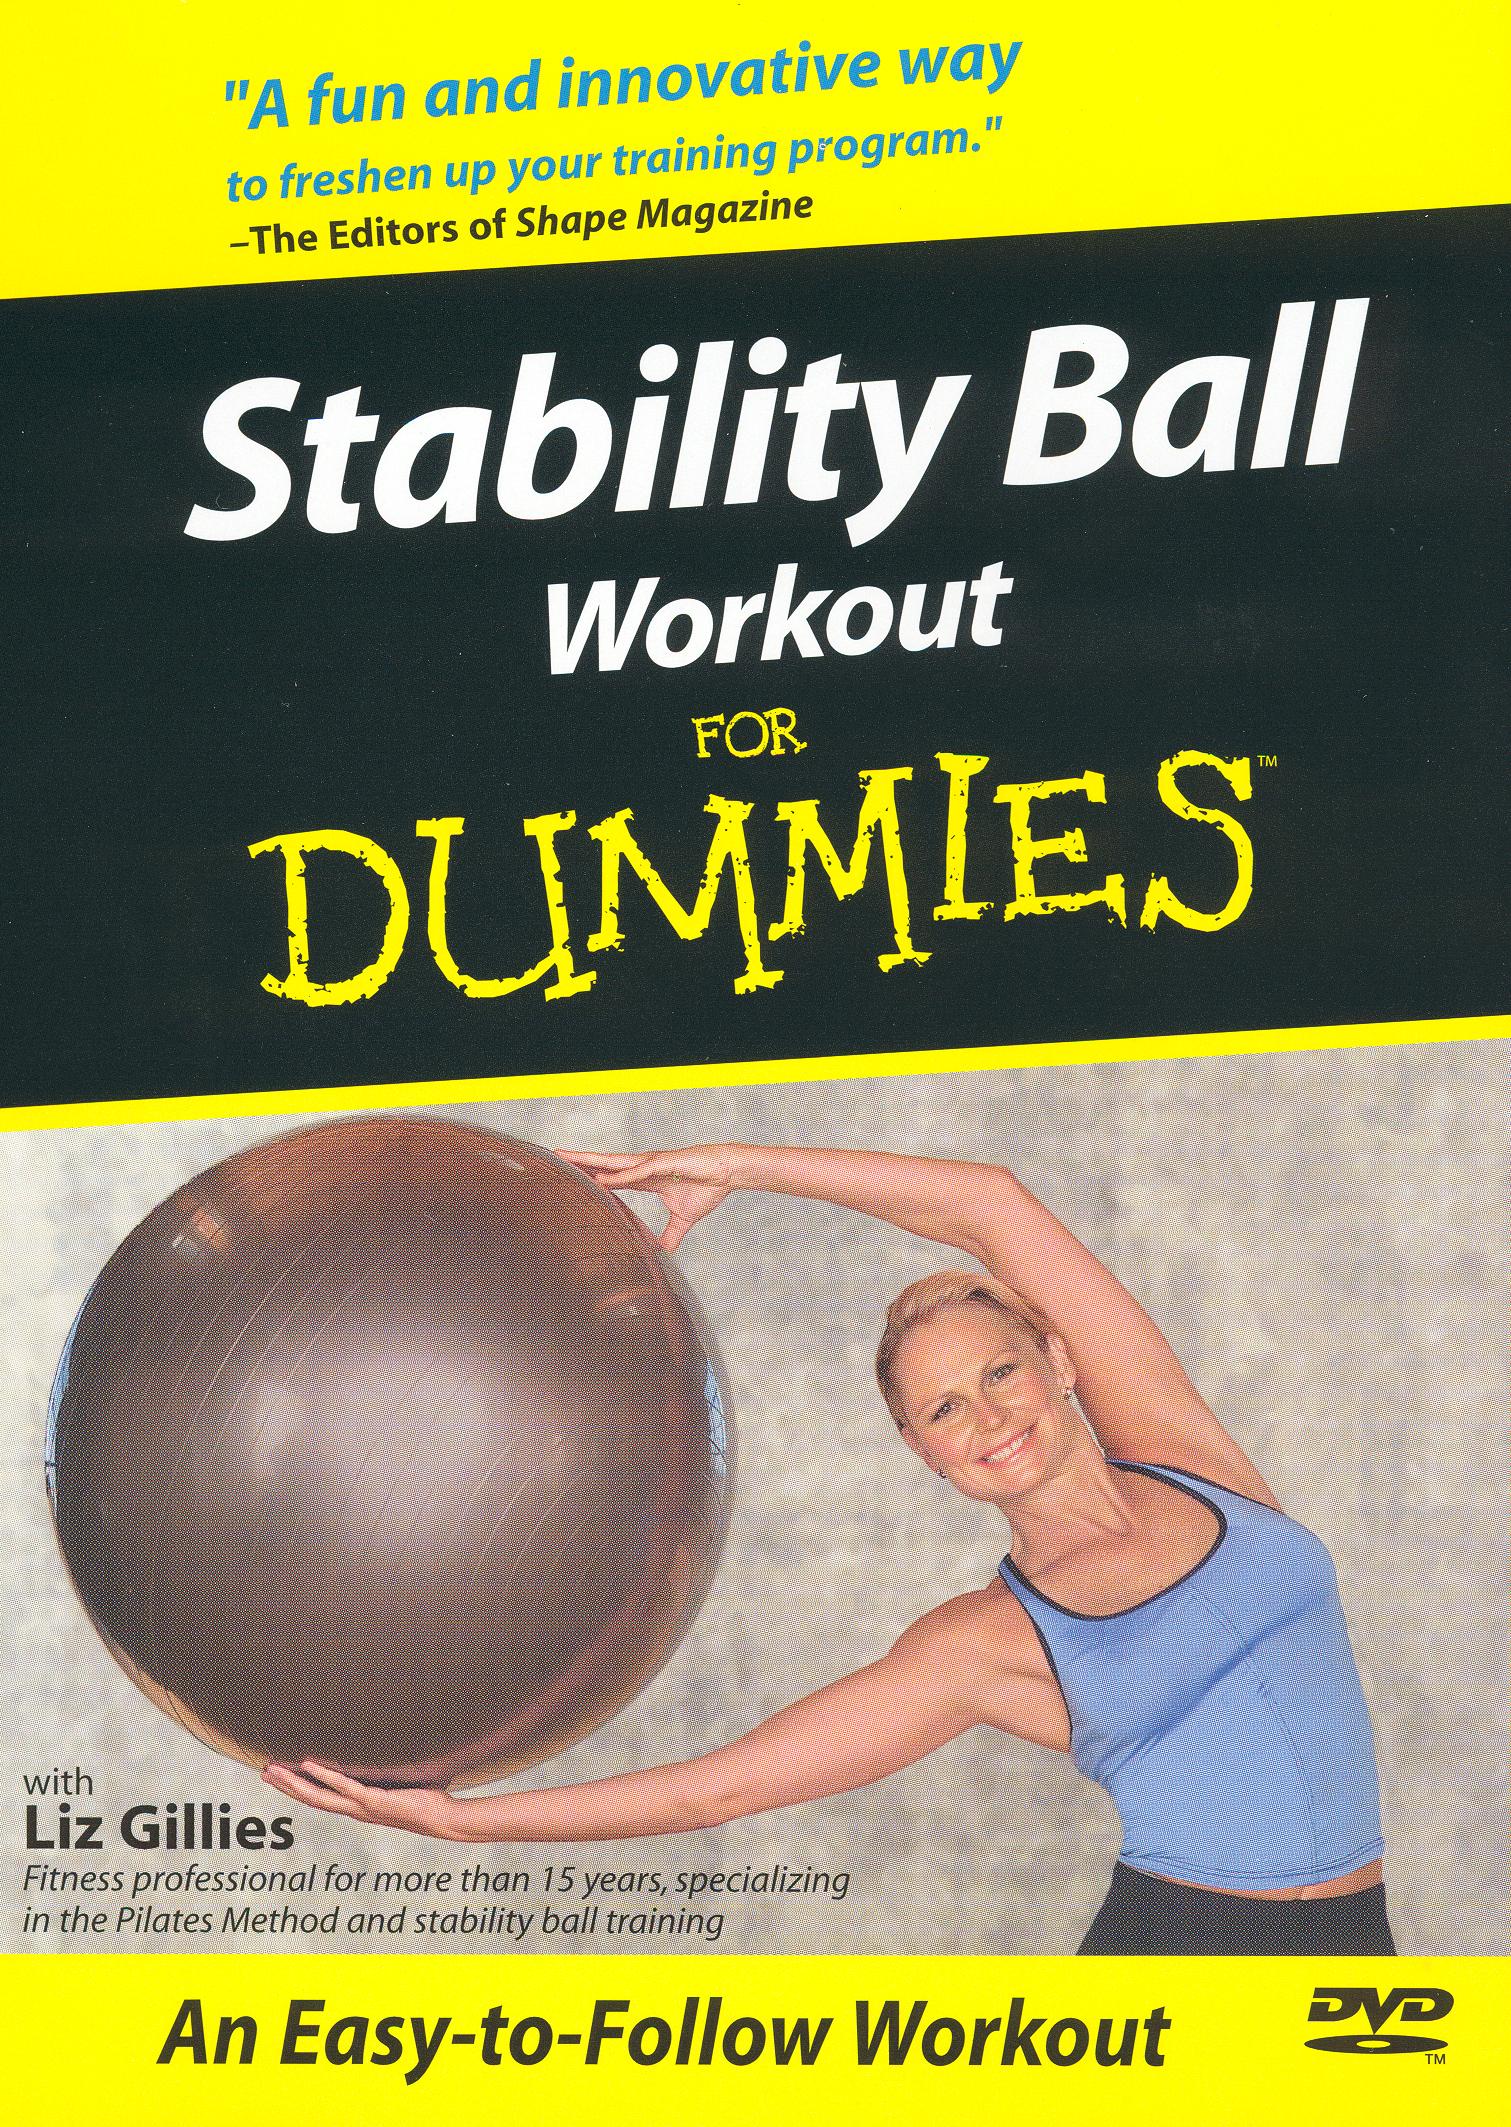 Best Buy: Stability Ball Workout for Dummies [DVD] [2003]